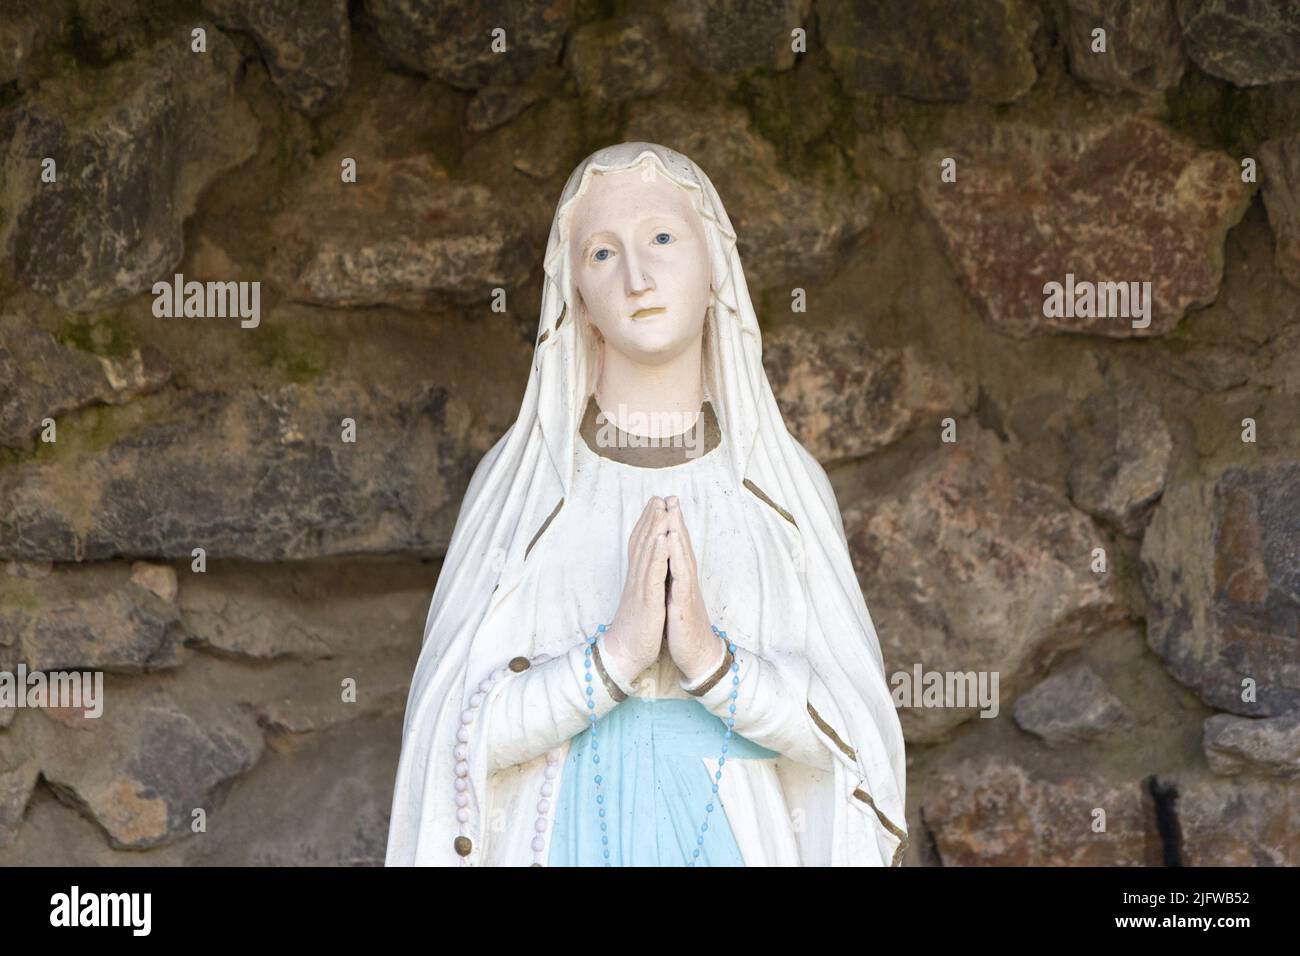 The statue of Our Lady of Lourdes (Notre Dame de Lourdes) in a grotto in a garden in Valenciennes, France. Stock Photo